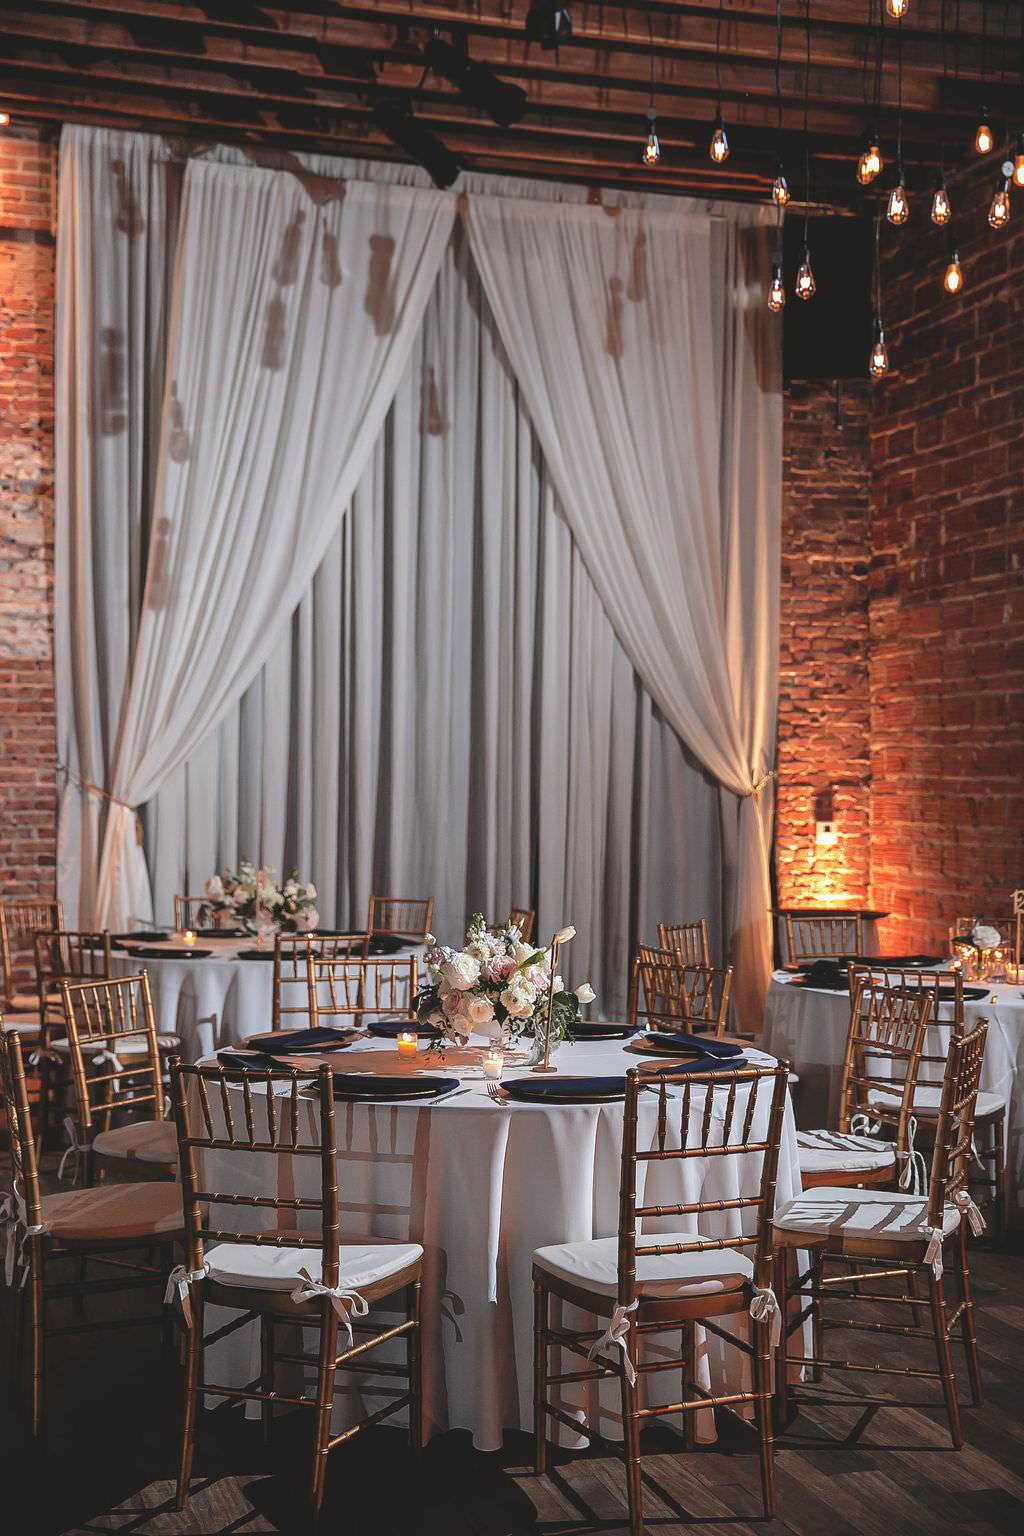 Classic Indoor Reception with Wedding Decor, Gold Chiavari Chairs, Round Tables with White Lines, Low Floral Centerpieces, Ivory, Blush Pink, Florals with Greenery | Historic Tampa Bay Wedding Venue NOVA 535